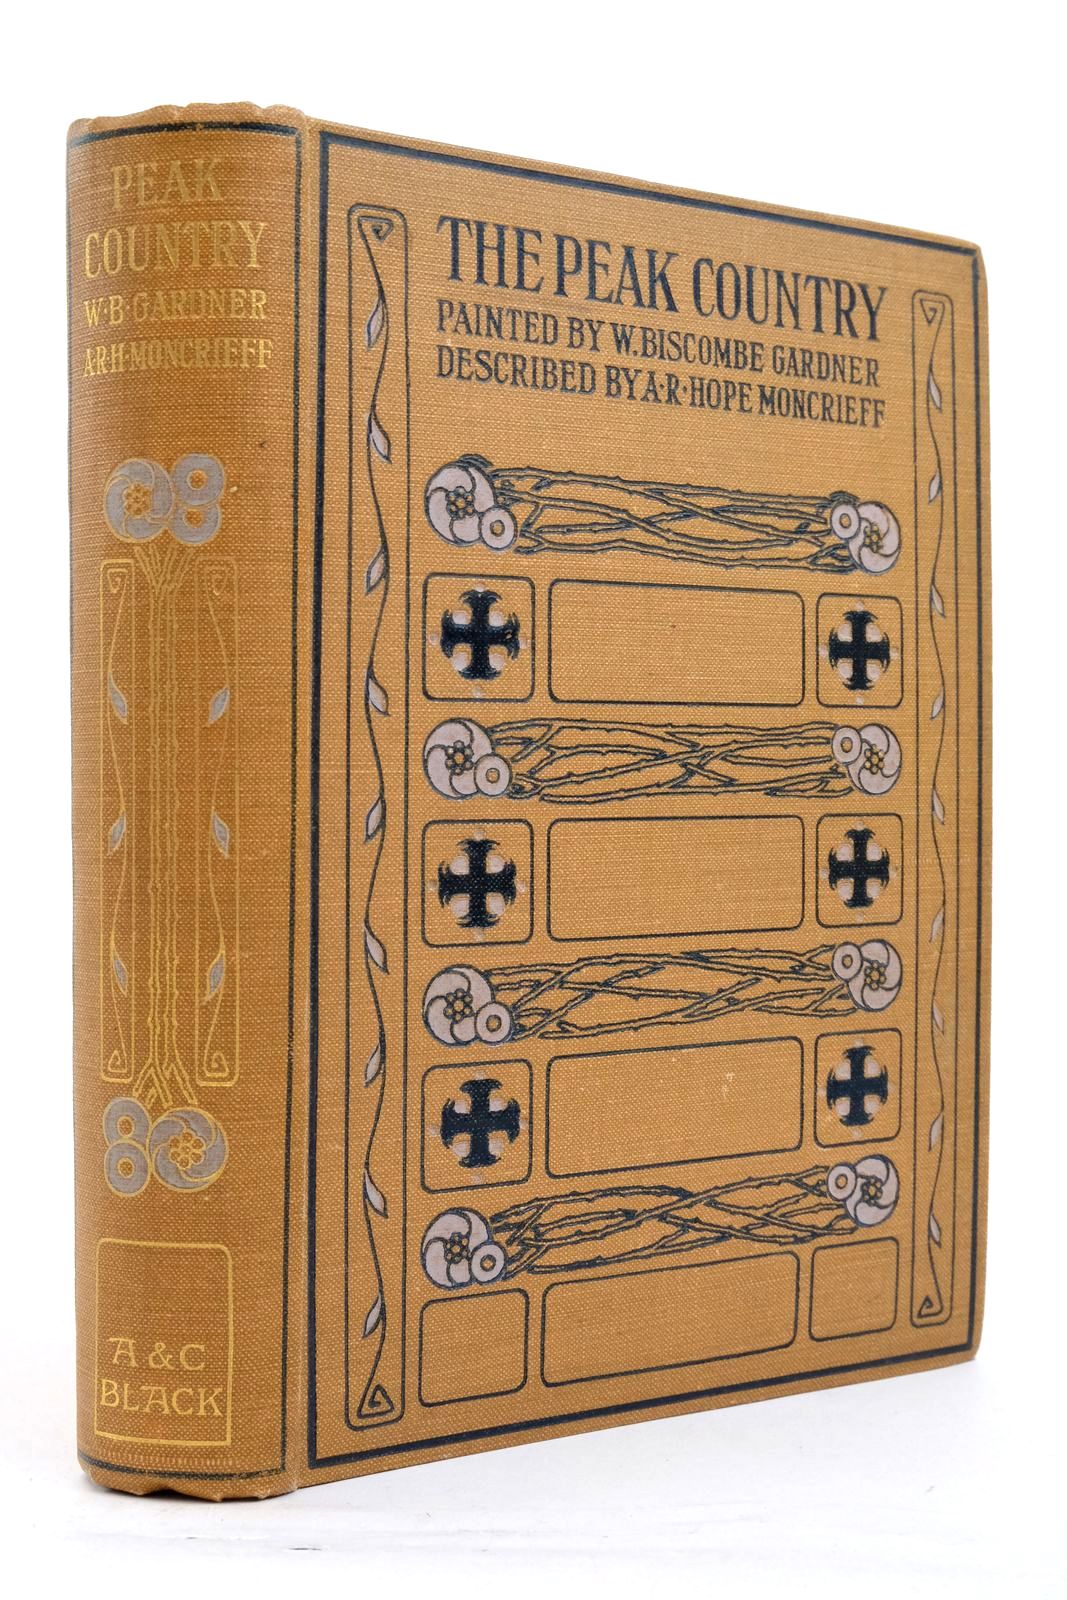 Photo of THE PEAK COUNTRY written by Moncrieff, A.R. Hope illustrated by Gardner, W. Biscombe published by Adam & Charles Black (STOCK CODE: 2137539)  for sale by Stella & Rose's Books